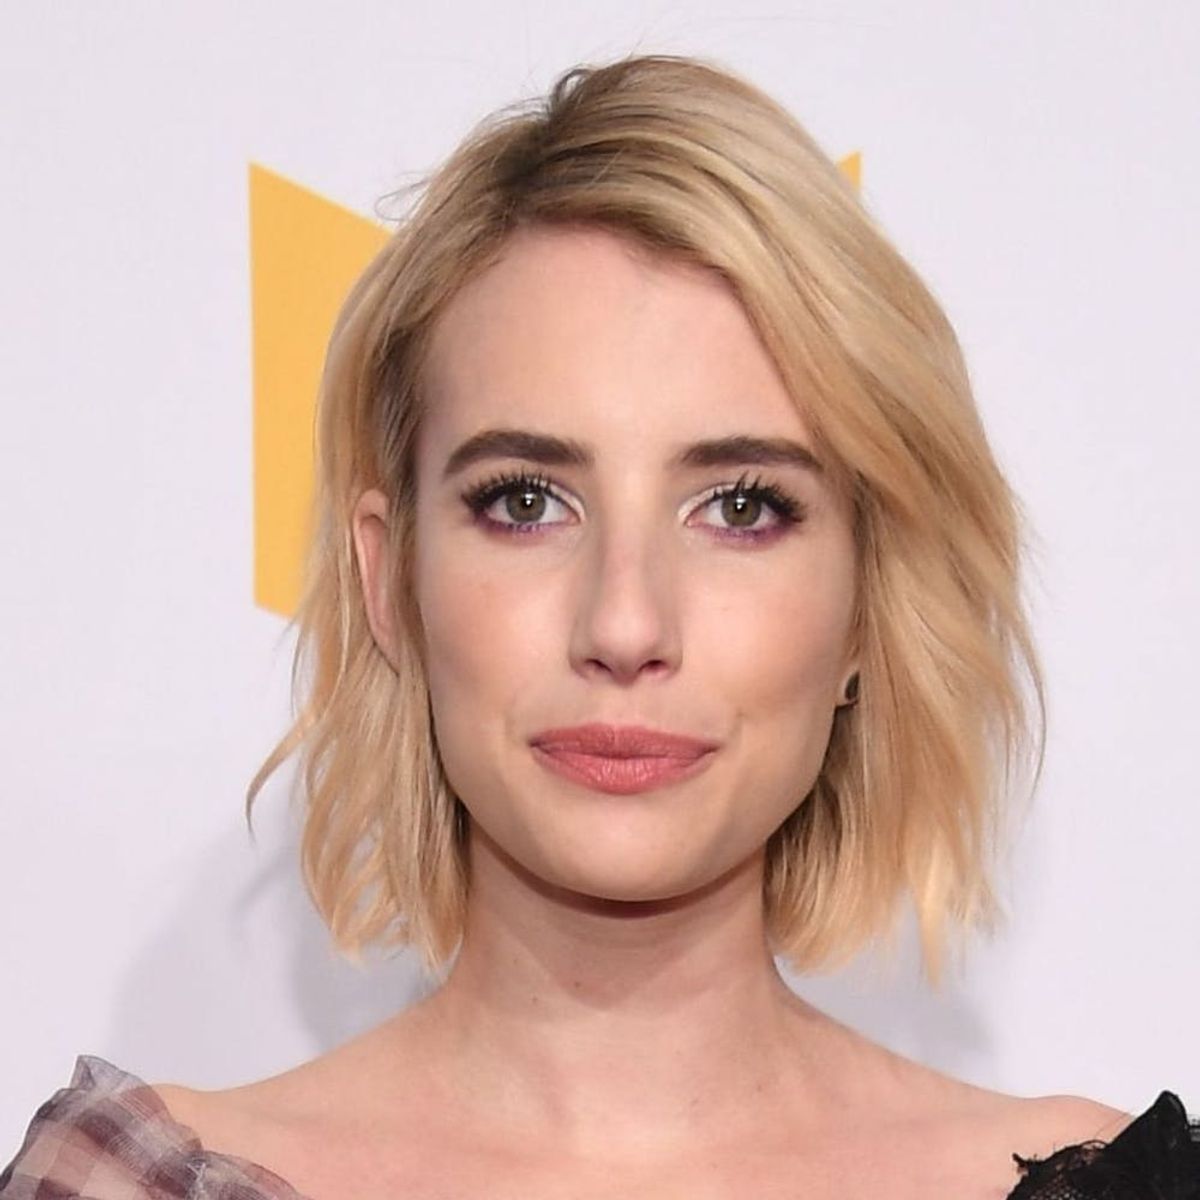 Emma Roberts Debuted the Most Dramatic Fringe on the 2018 Critics’ Choice Awards Carpet